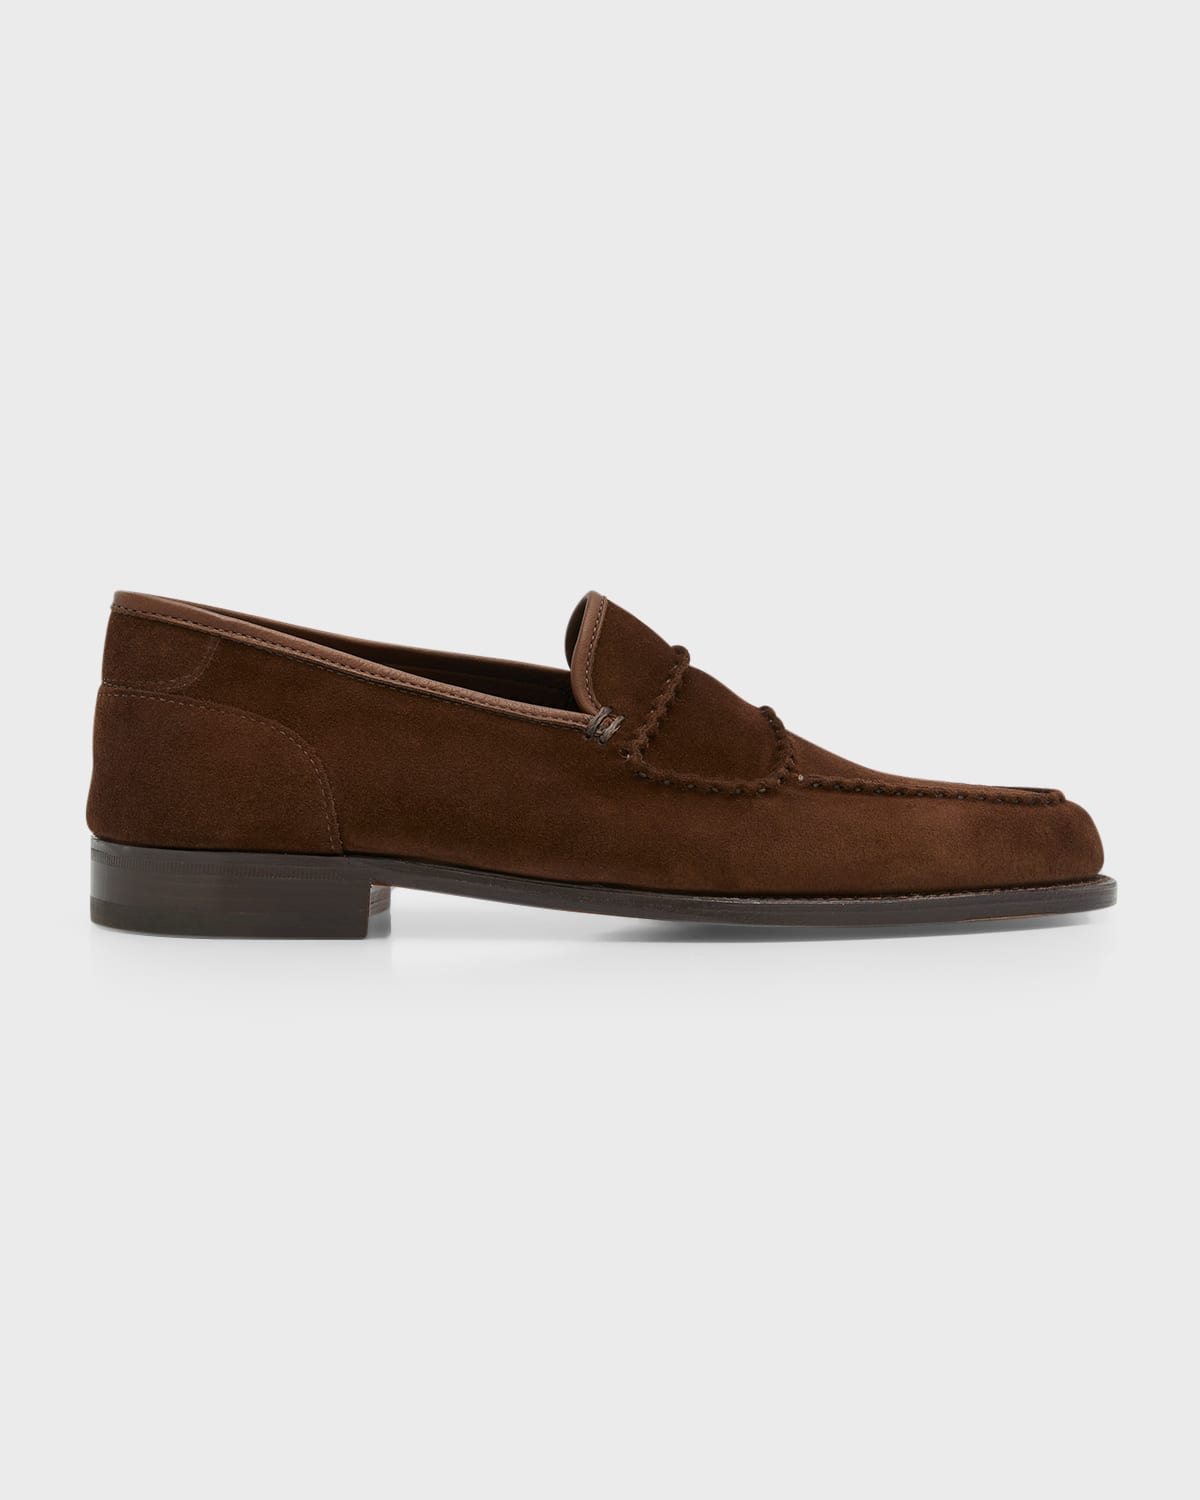 Burberry Men's Logo Coin Suede Penny Loafers | Neiman Marcus